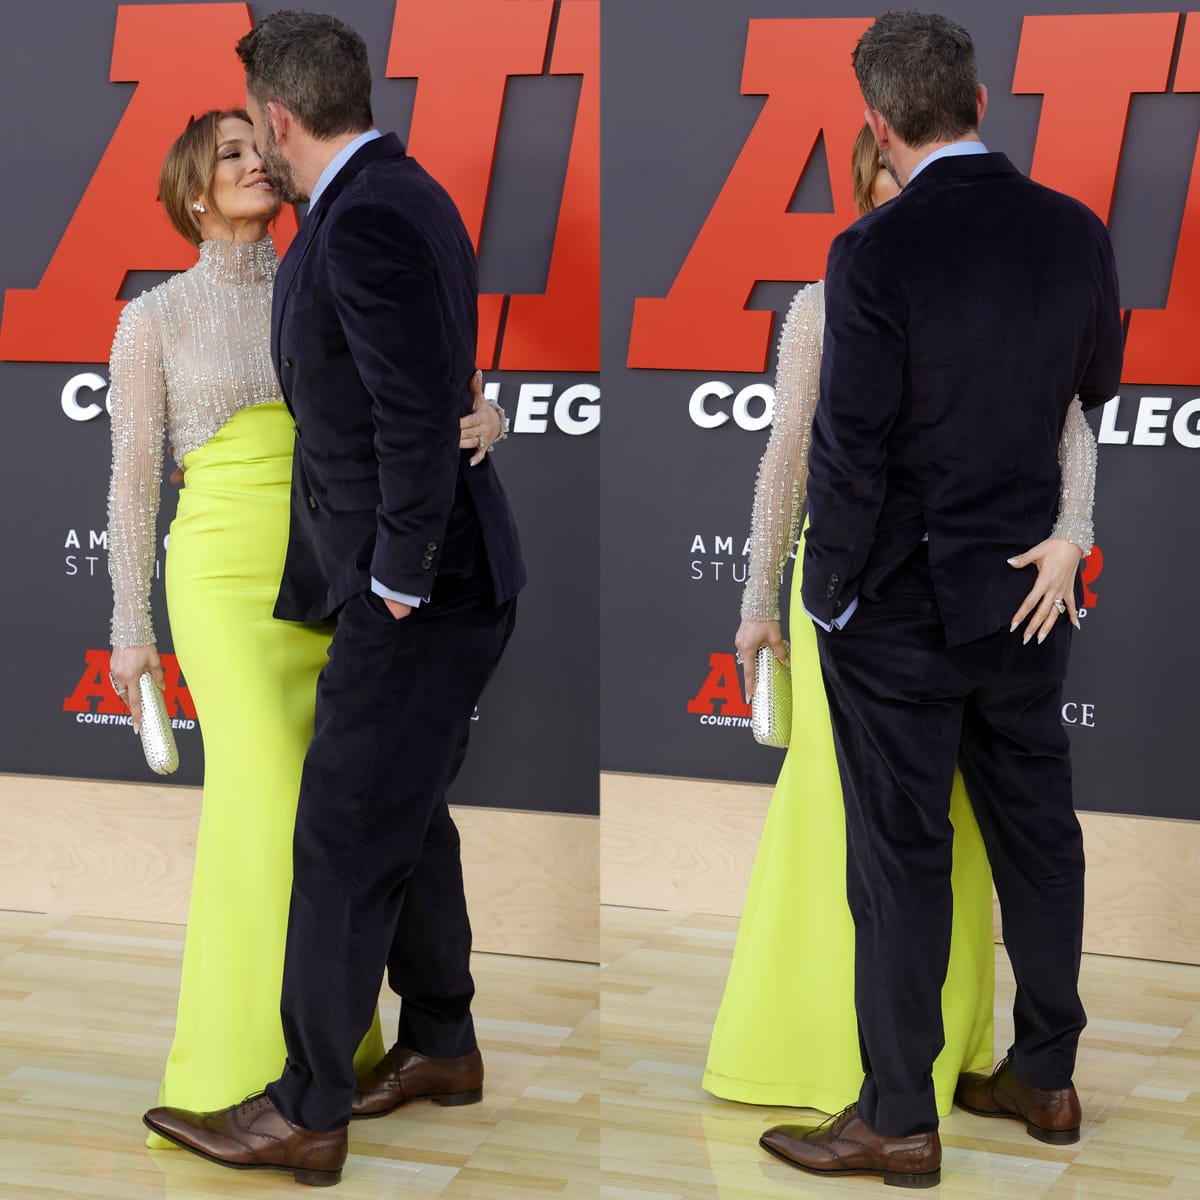 Jennifer Lopez grabs Ben Affleck's butt as they kiss on the red carpet ahead of the premiere Affleck's latest film, Air, at the Regency Village Theatre on March 27, 2023